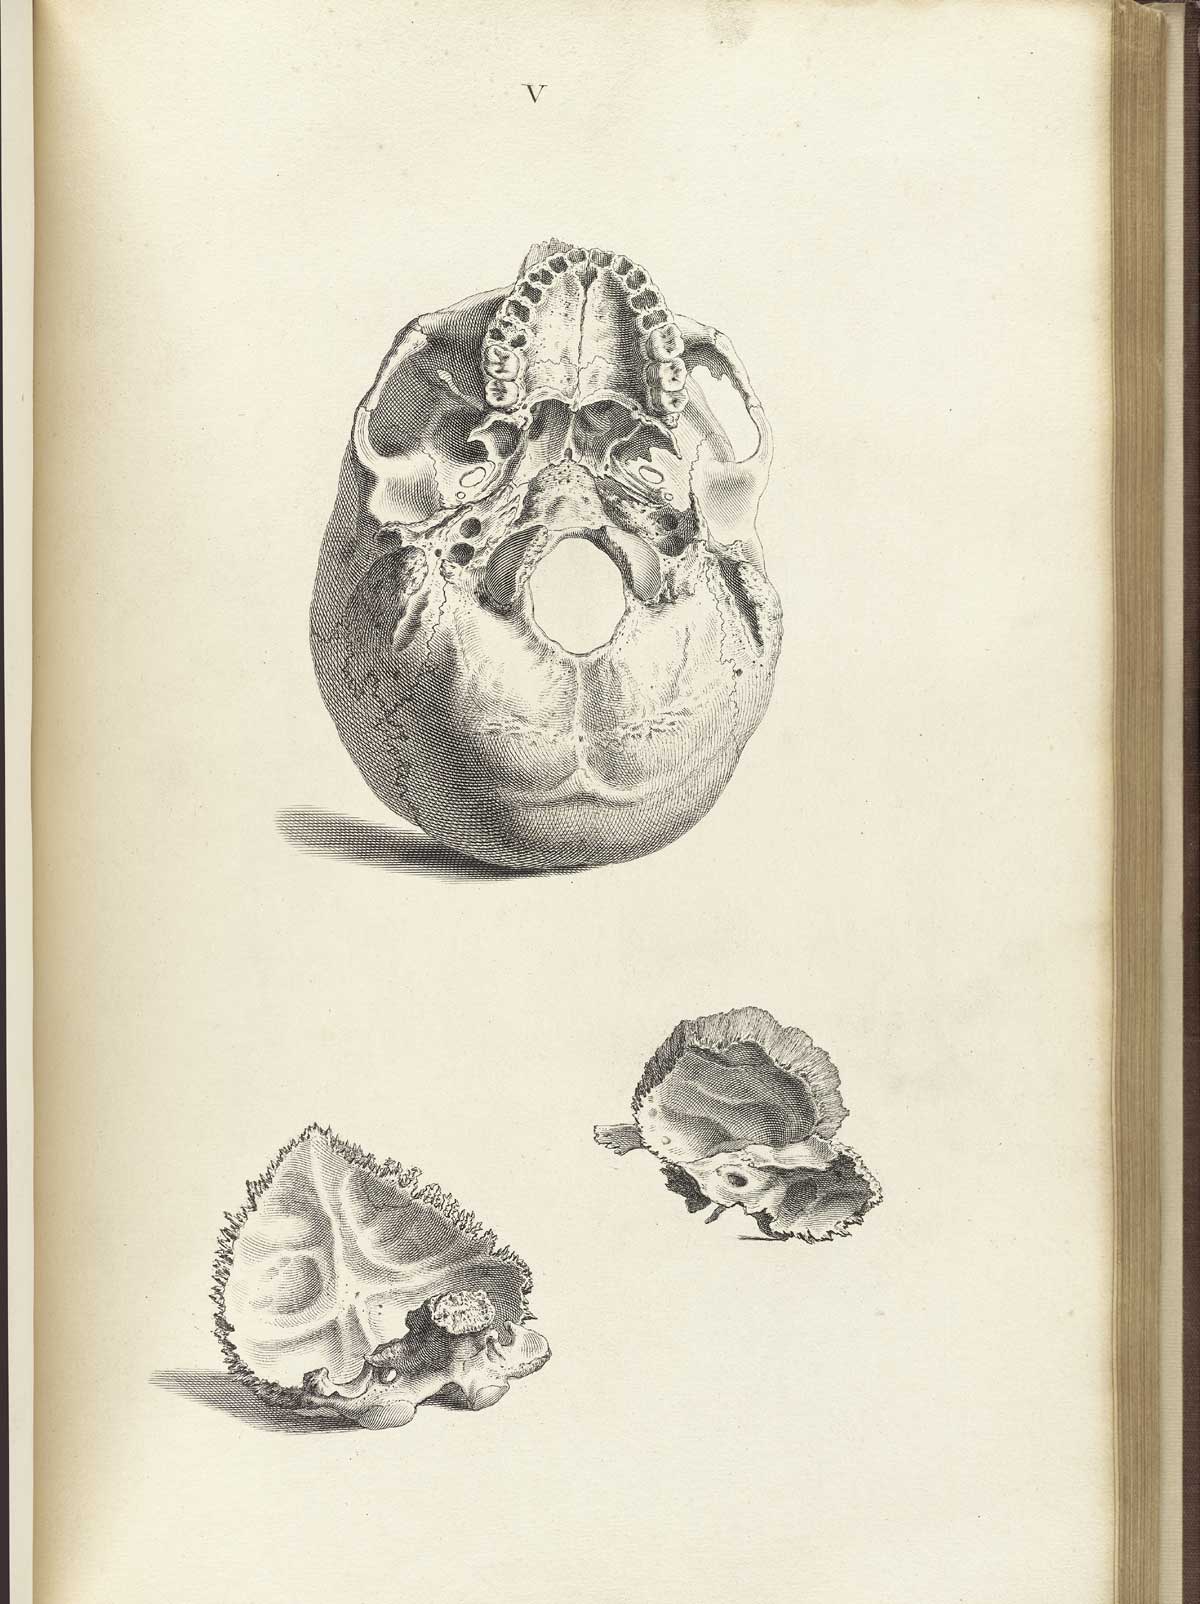 Engraving of a human skull viewed from the bottom with views of the occipital bone, foramen magnum and hard palate at the top of the image and two other bones beneath, from William Cheselden’s Osteographia, NLM Call no.: WZ 260 C499o 1733.